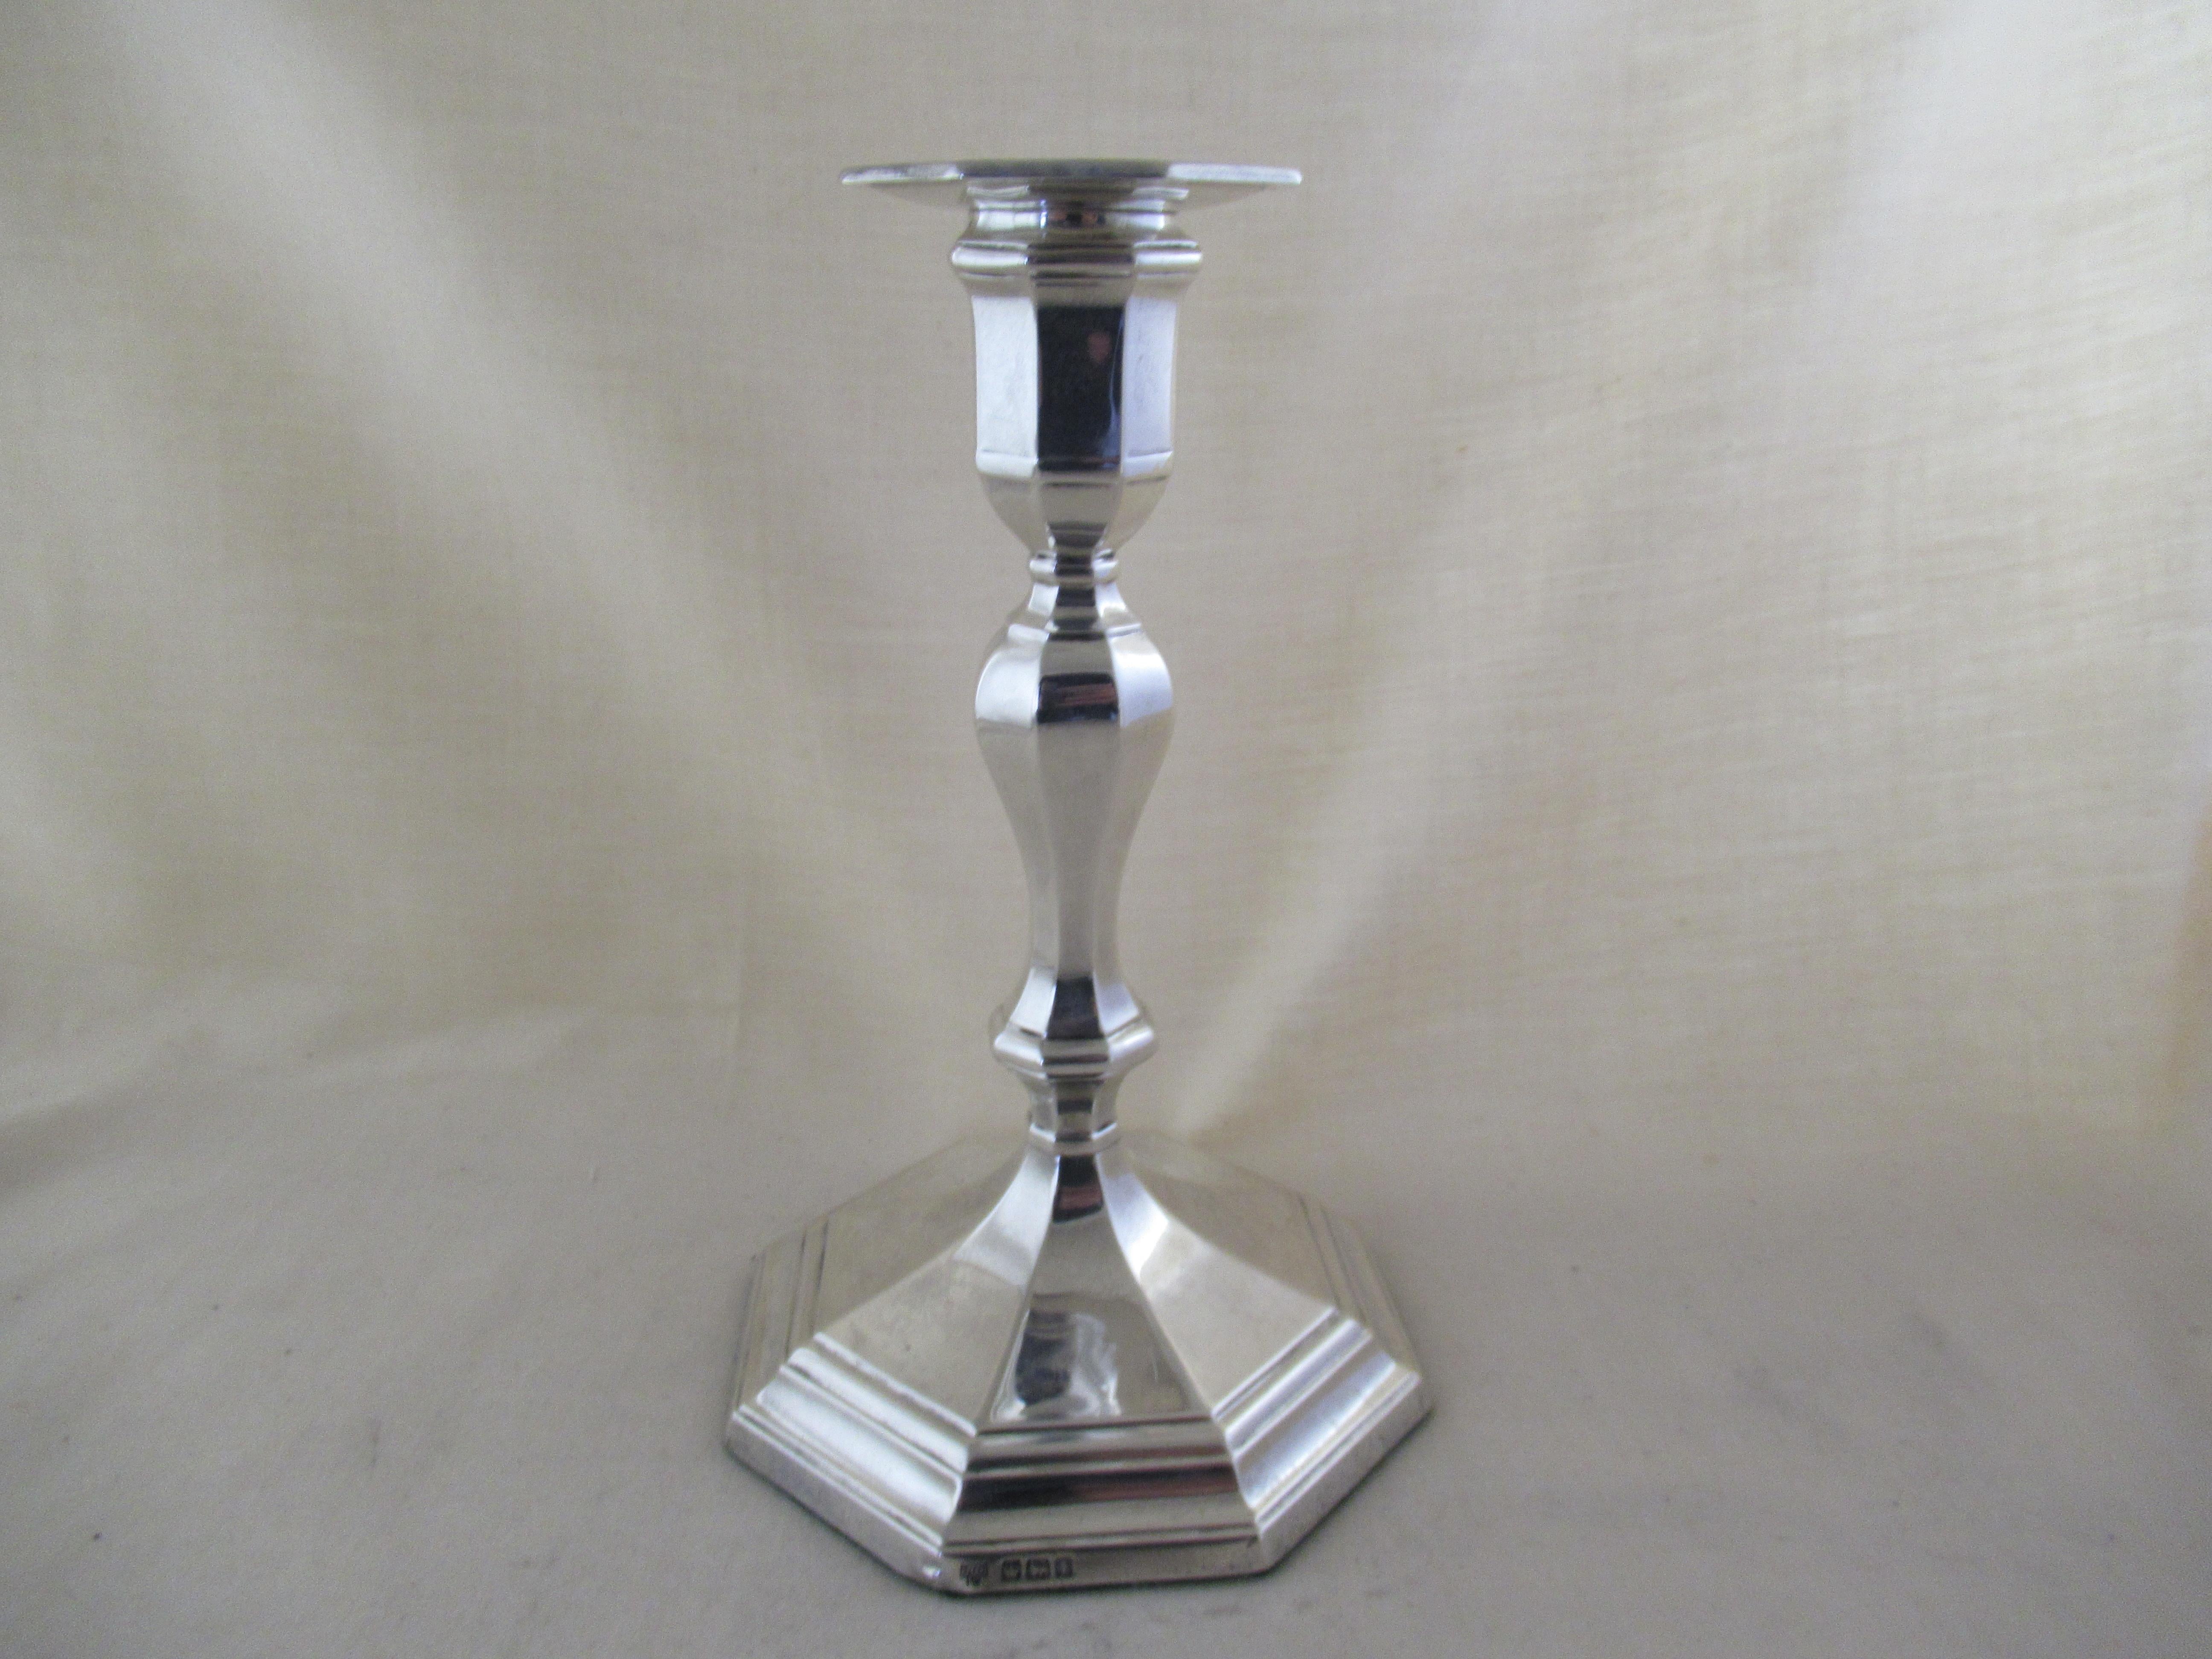 Sterling Solid Silver - ANTIQUE OCTAGONAL TABLE CANDLESTICK
                                         In the Queen Anne style (1702 to 1714)
A full set of English hallmarks which show that it was made in Sheffield 1917
Marks applied by the